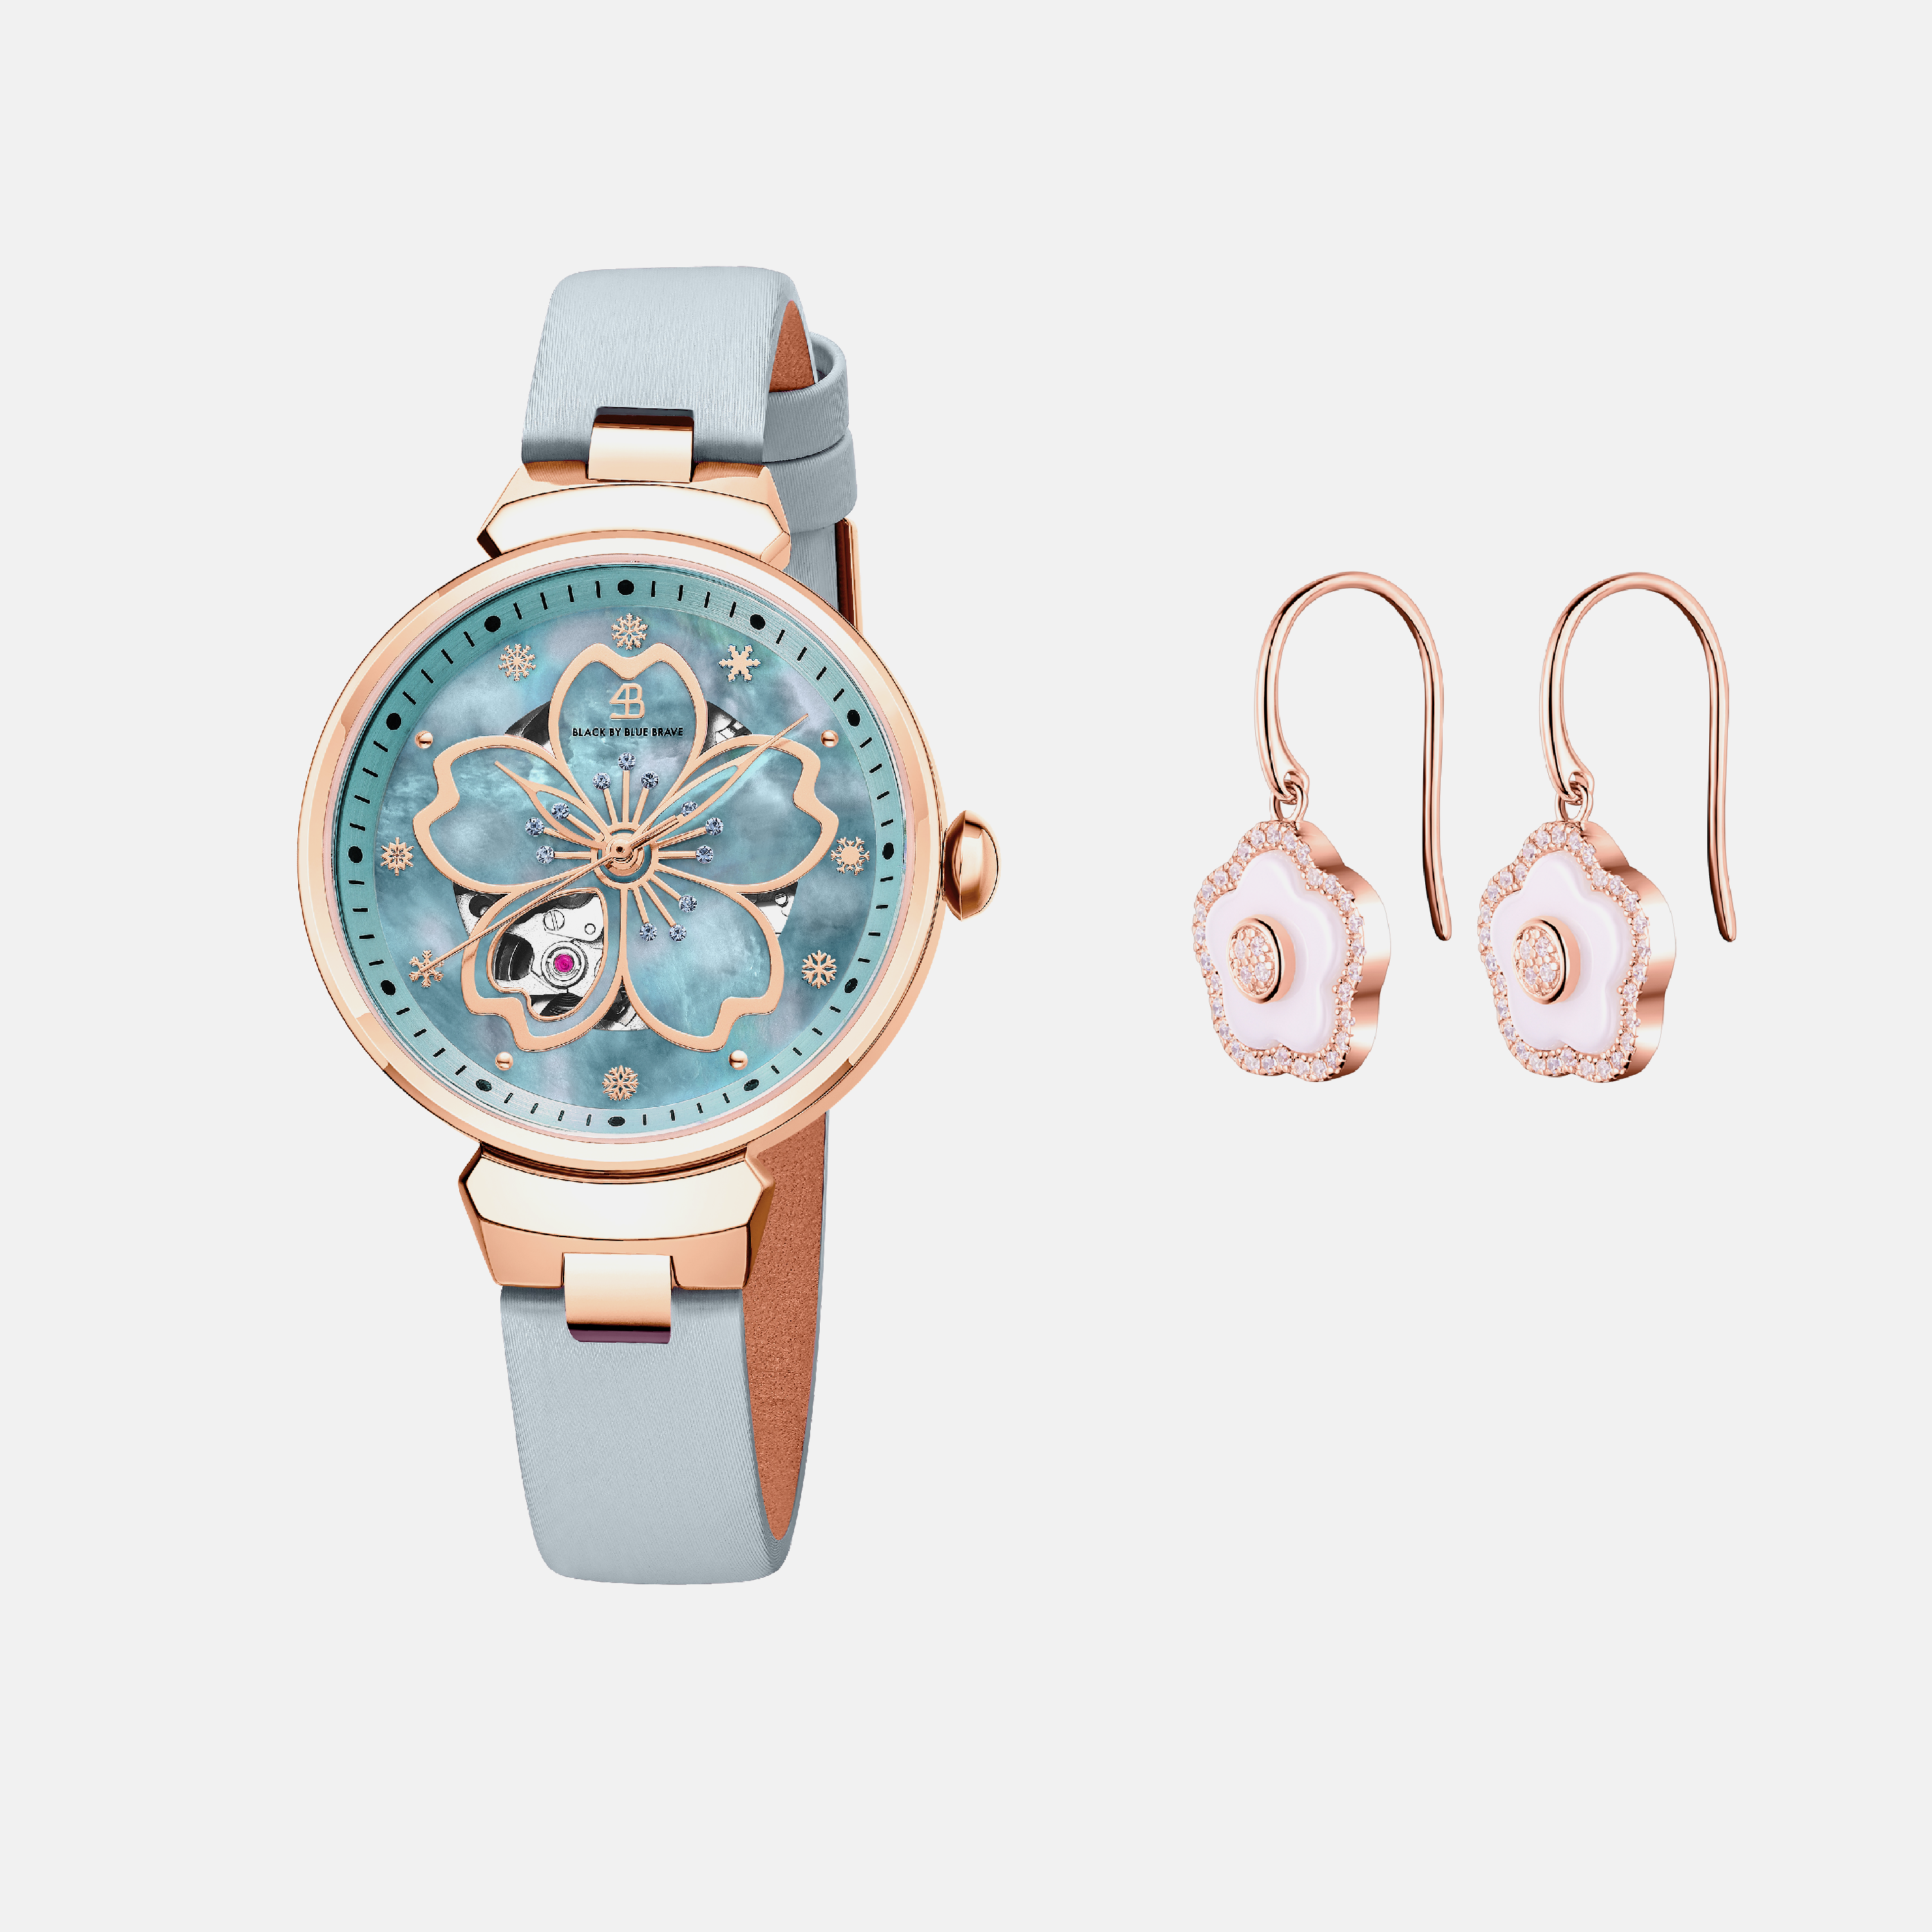 BLUE CHERRY BLOSSOM 36MM AUTOMATIC WATCH & ROSEGOLD FLOWER EARRINGS & WHITE CERAMIC